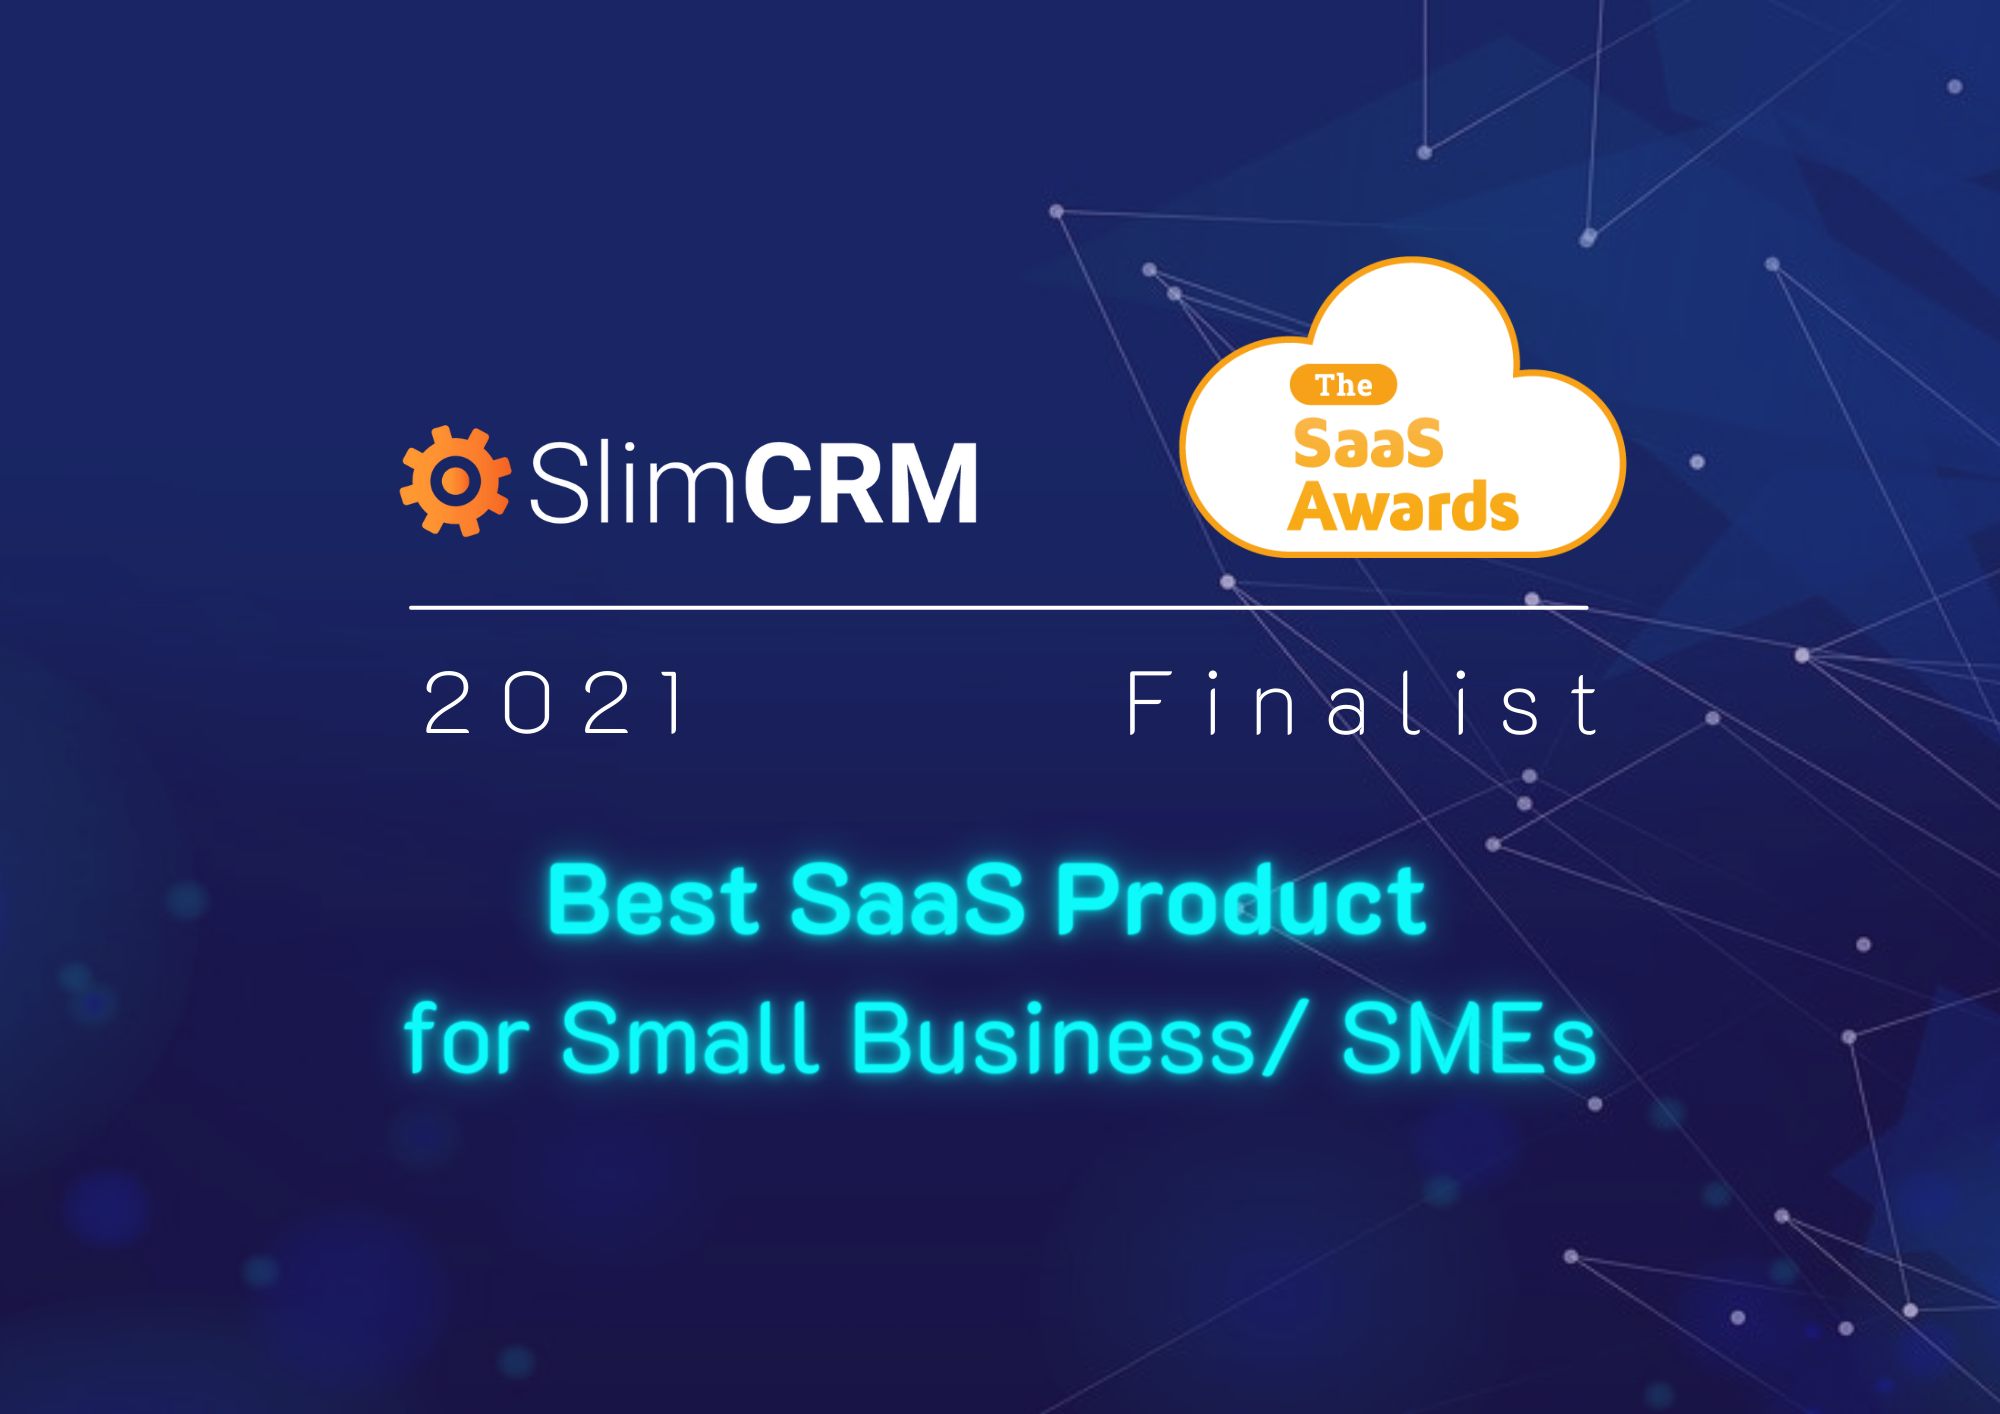 Best SaaS Product for Small Business/ SMEs